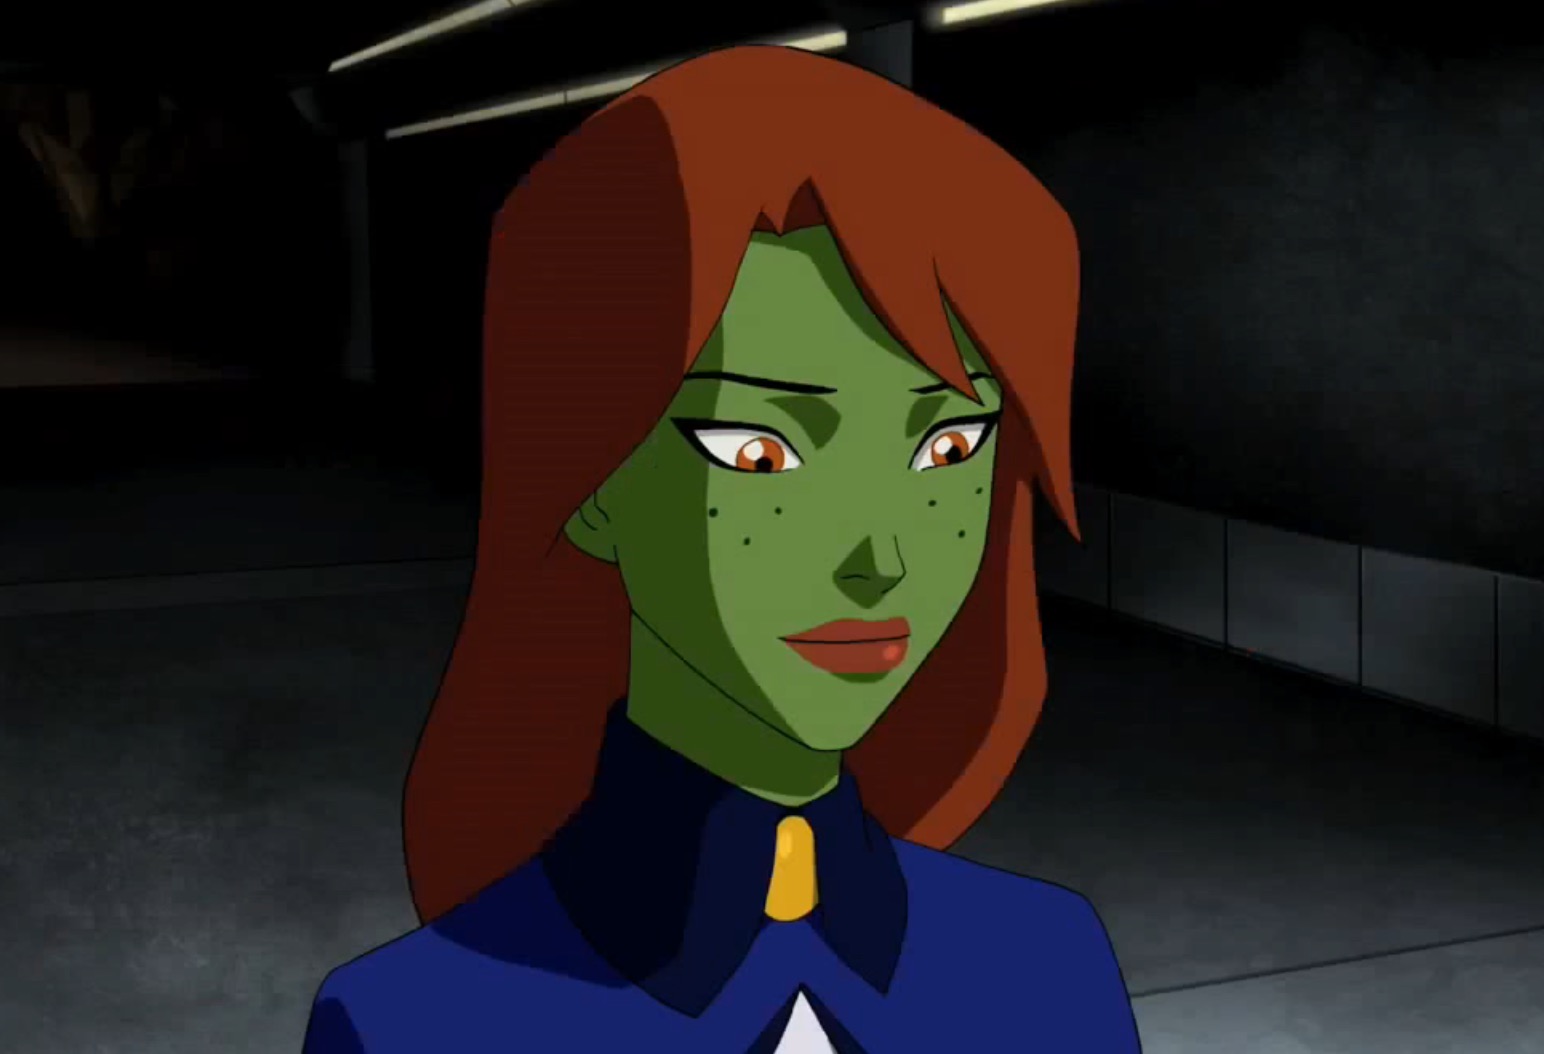 young justice miss martian and lagoon boy